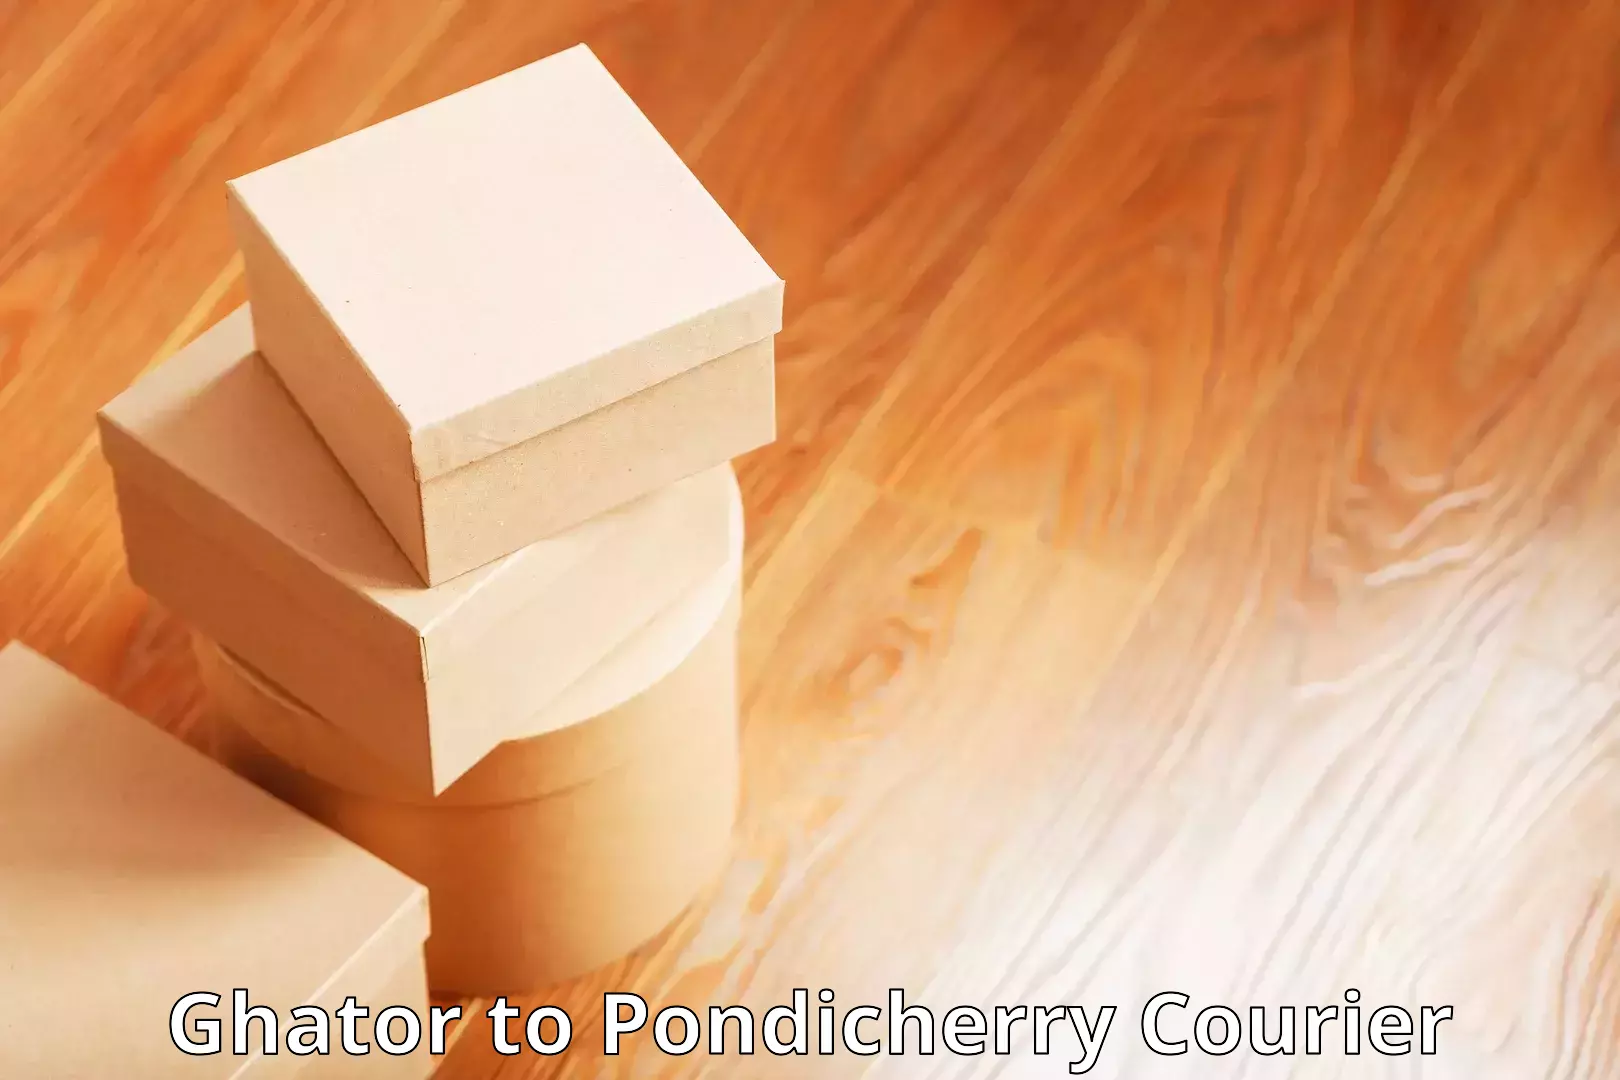 Quality courier partnerships Ghator to Pondicherry